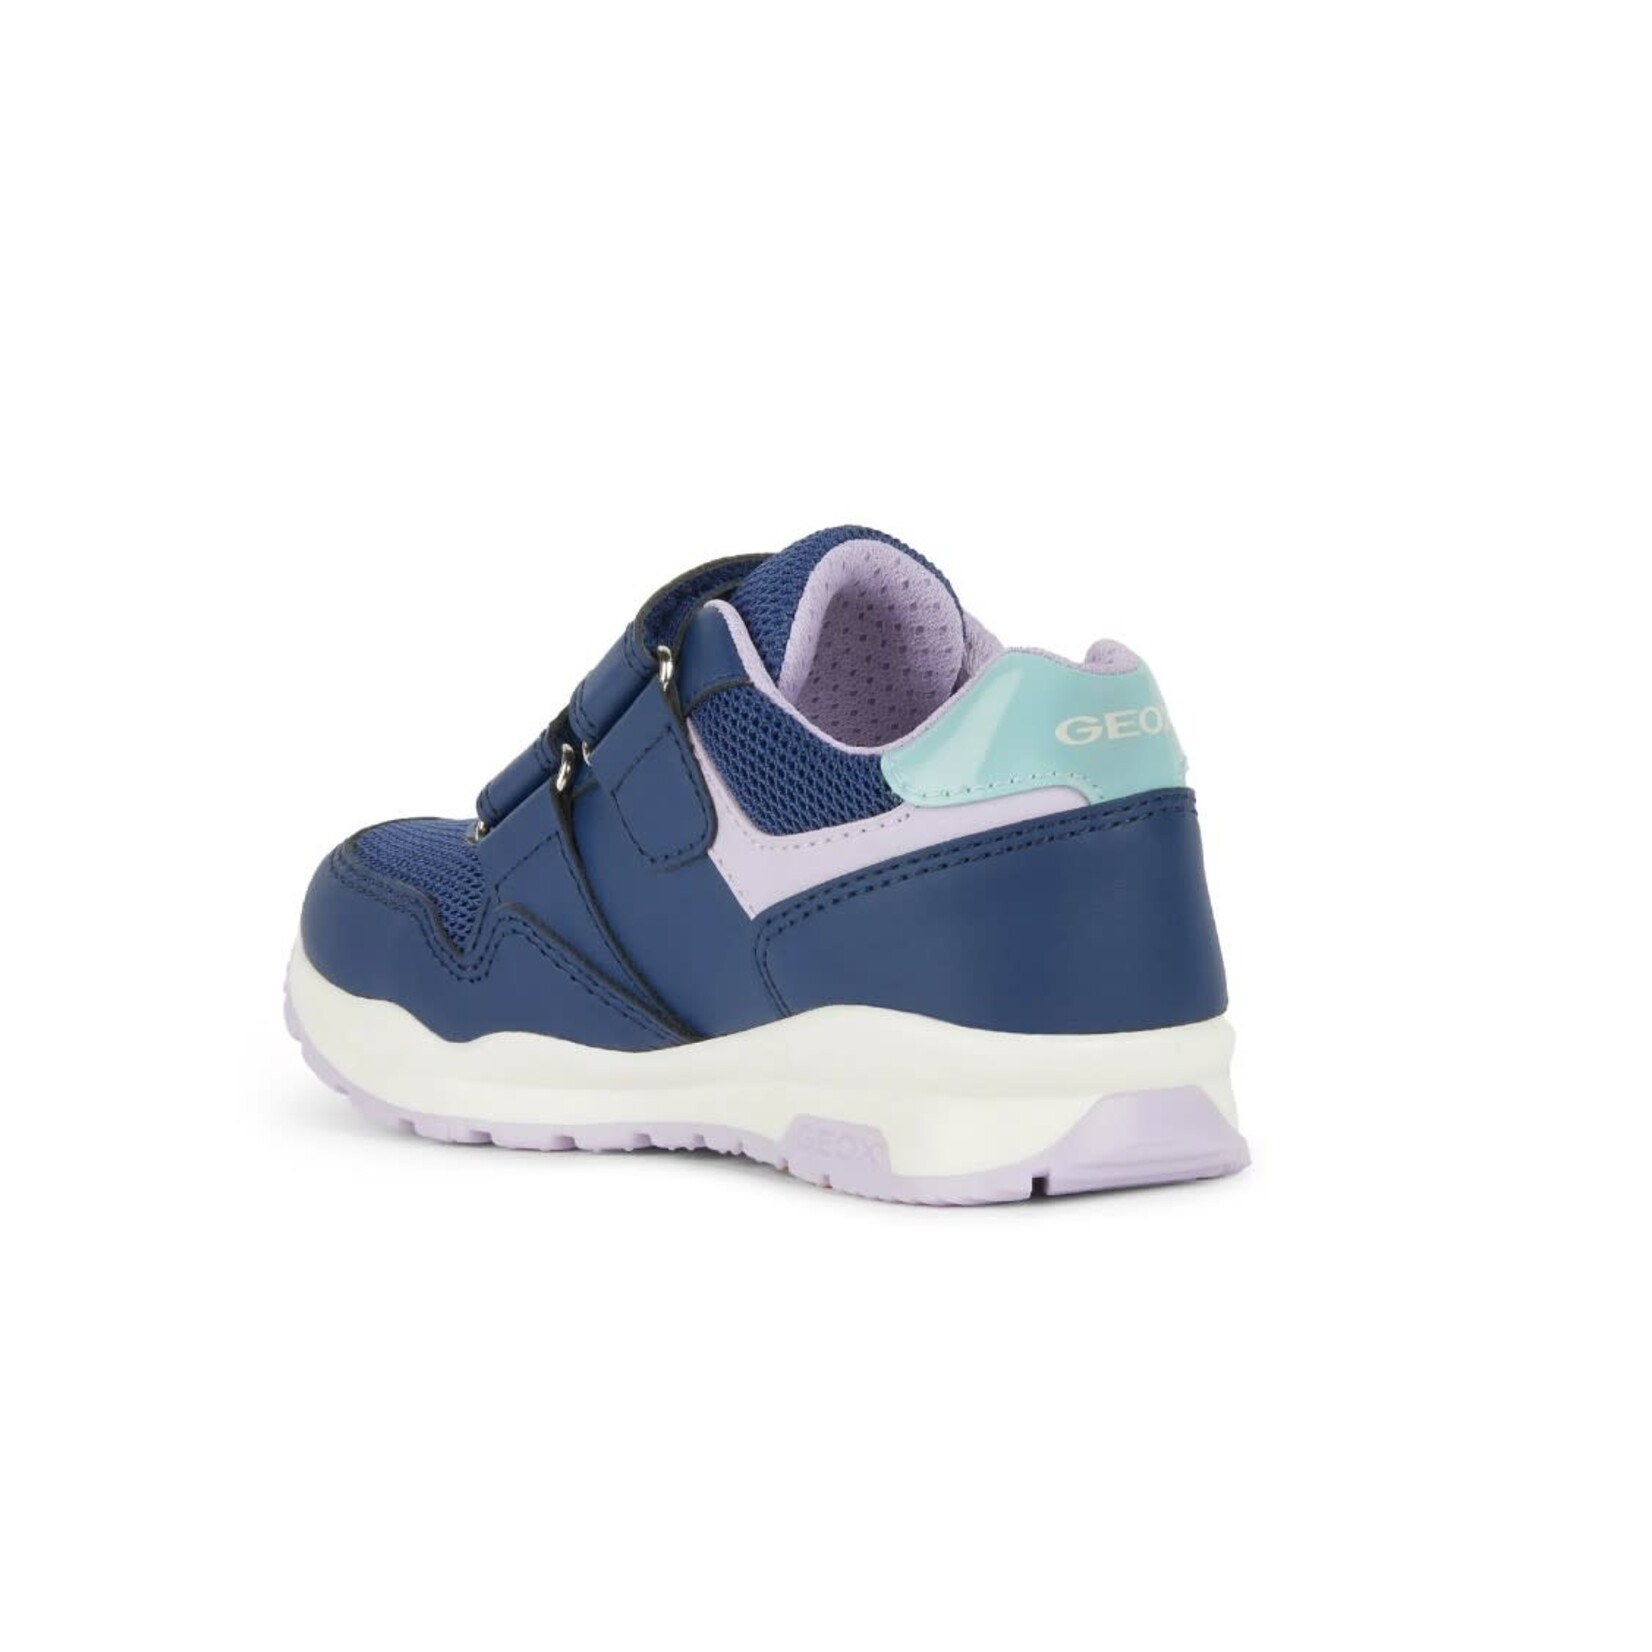 Geox GEOX - Running shoes in synthetic leather and mesh  'Pavel - Navy/Lilac'